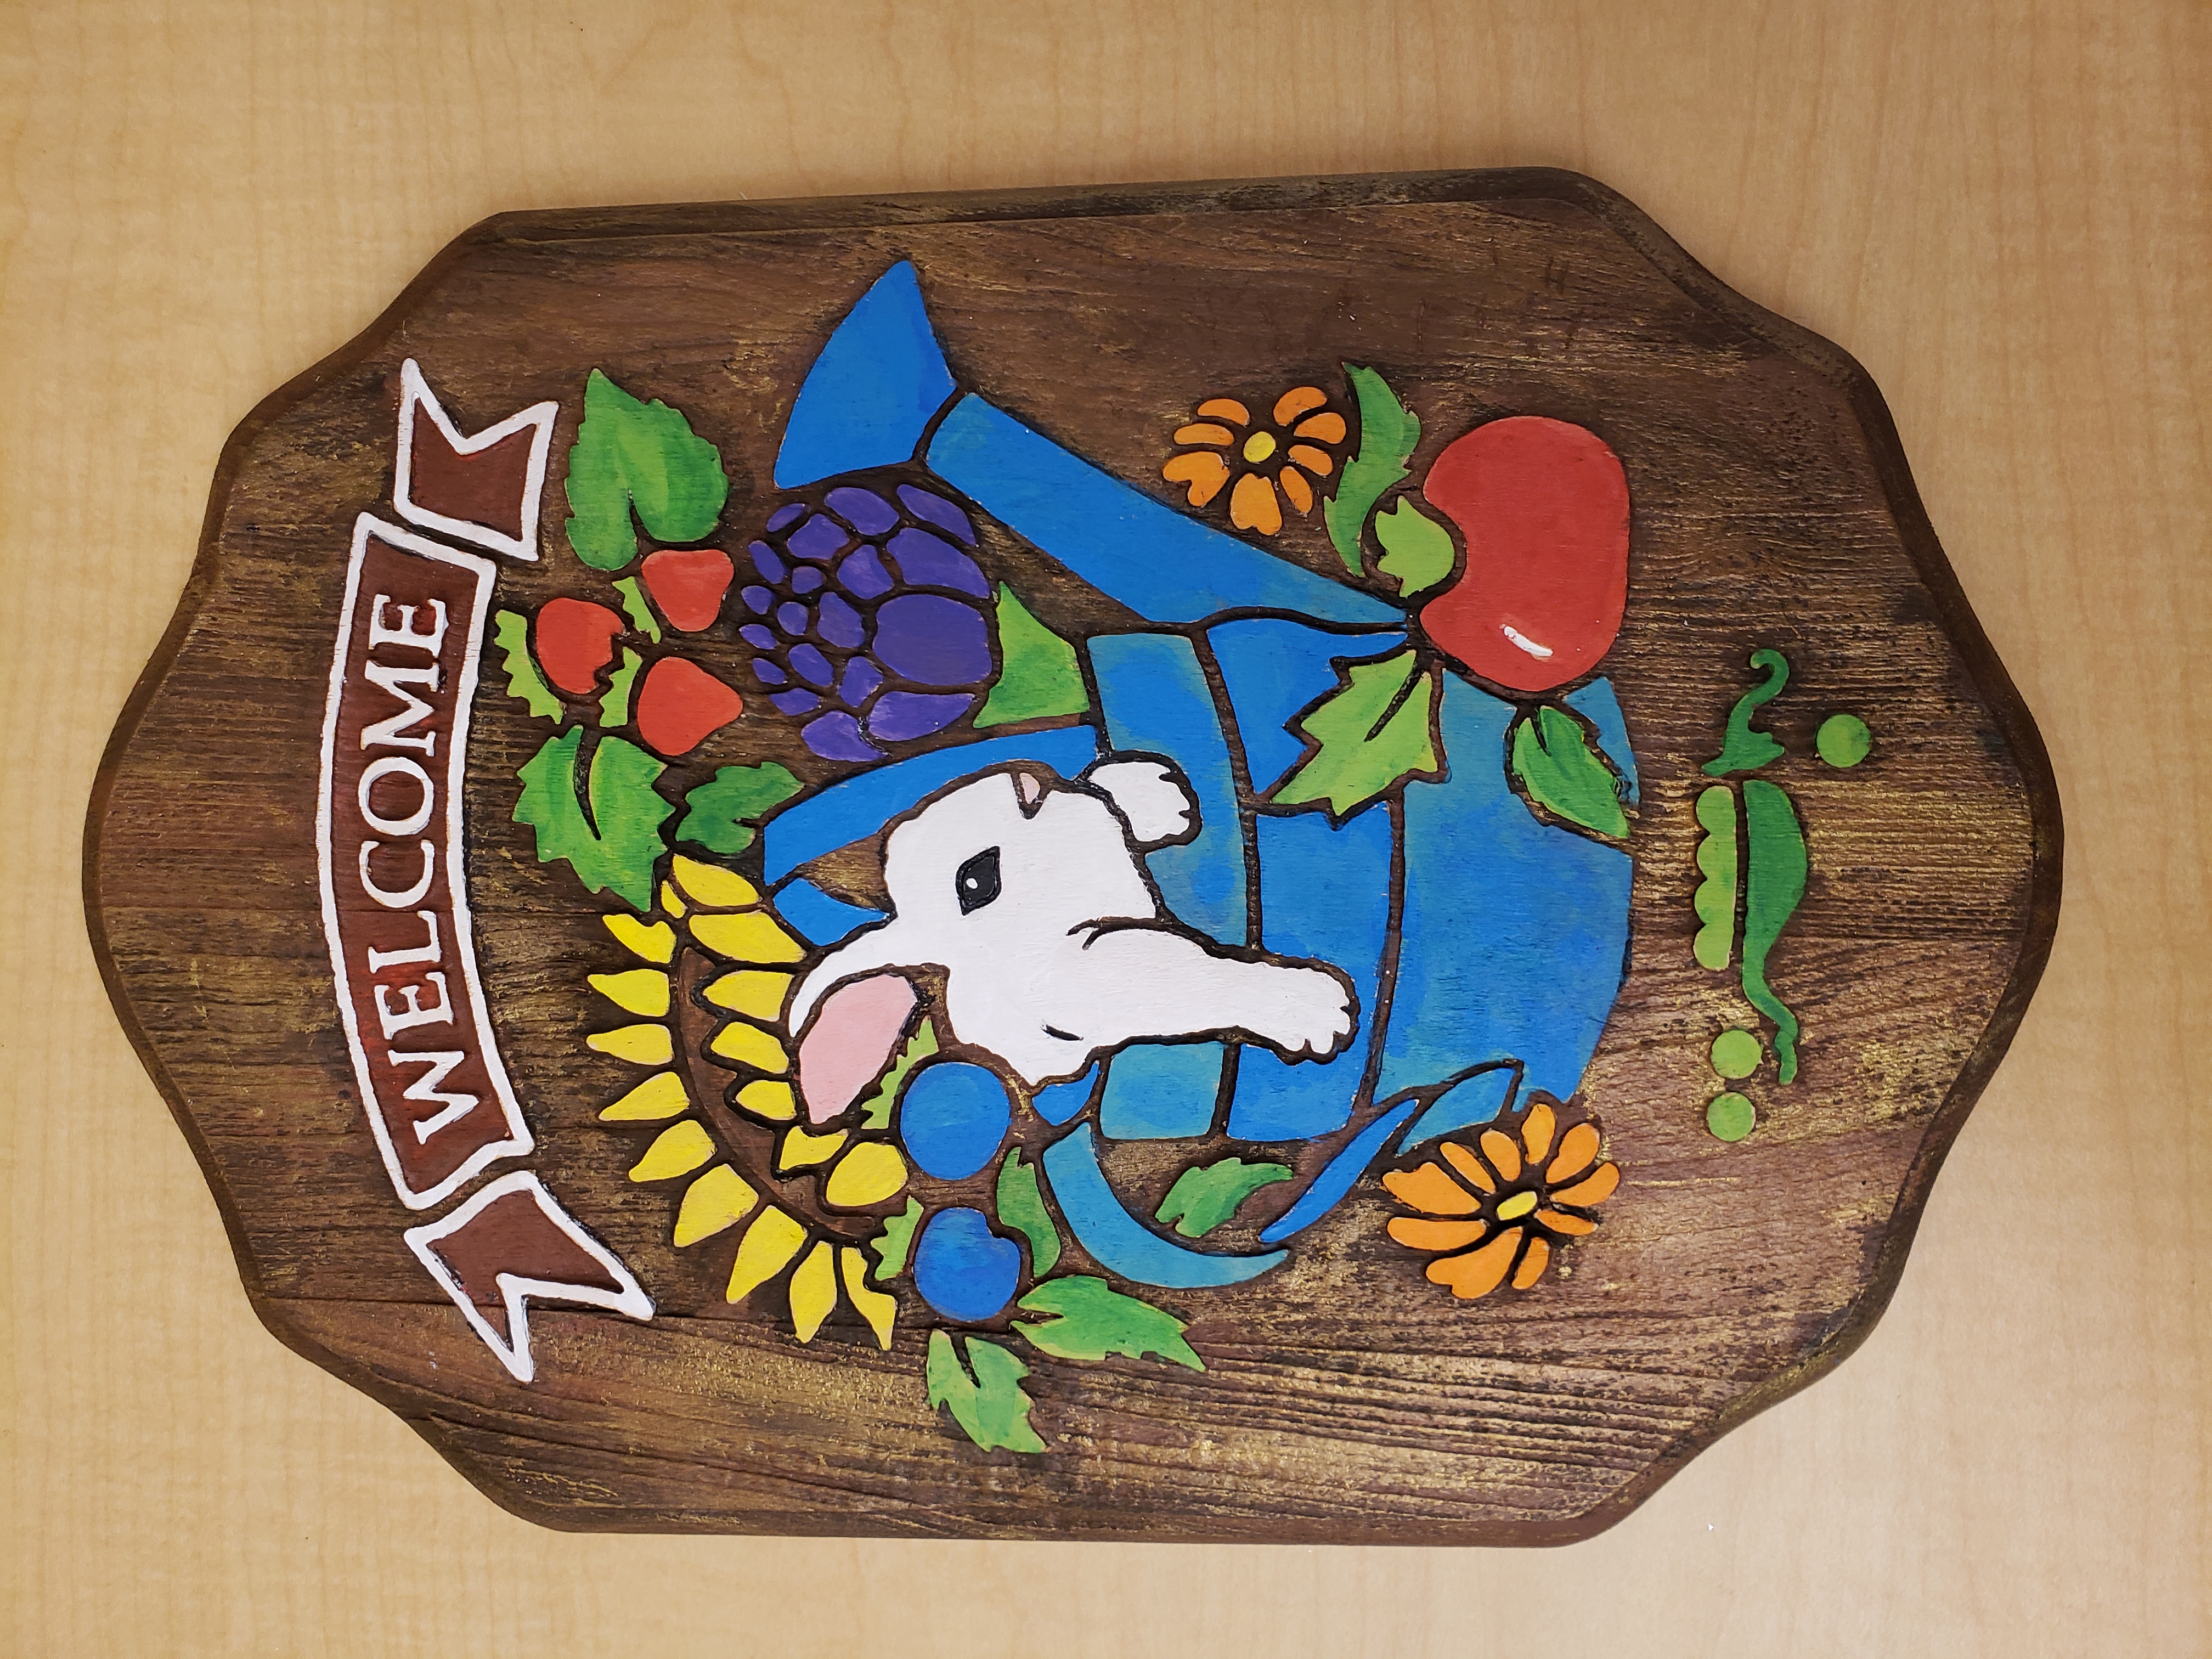 A painted wooden welcome sign featuring a rabbit in a watering can surrounded by plants and flowers